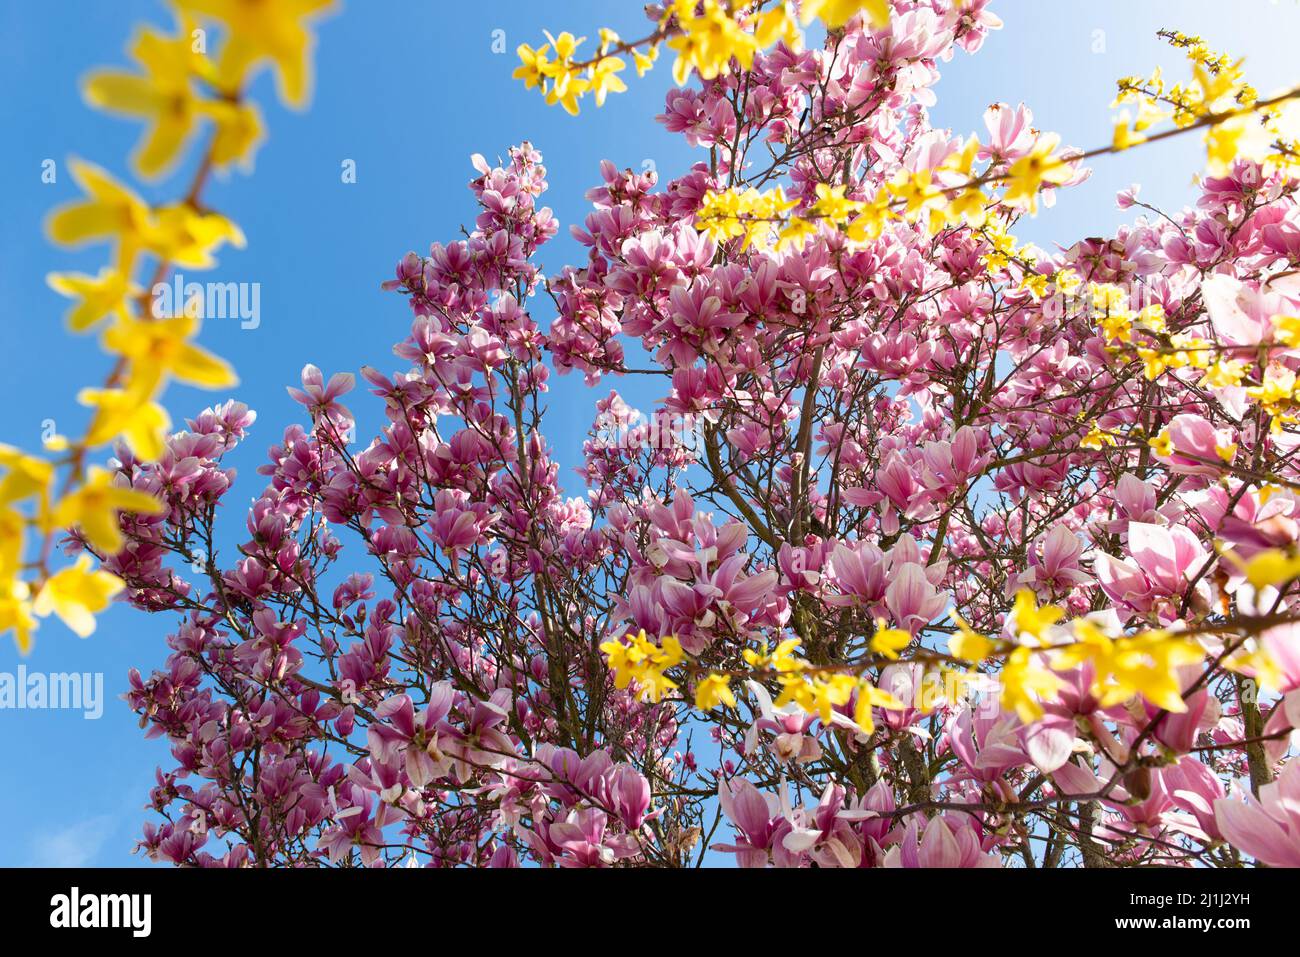 Spectacular pink magnolia flowers in bloom on a blue sky with yellow forsythia branch on foreground Stock Photo